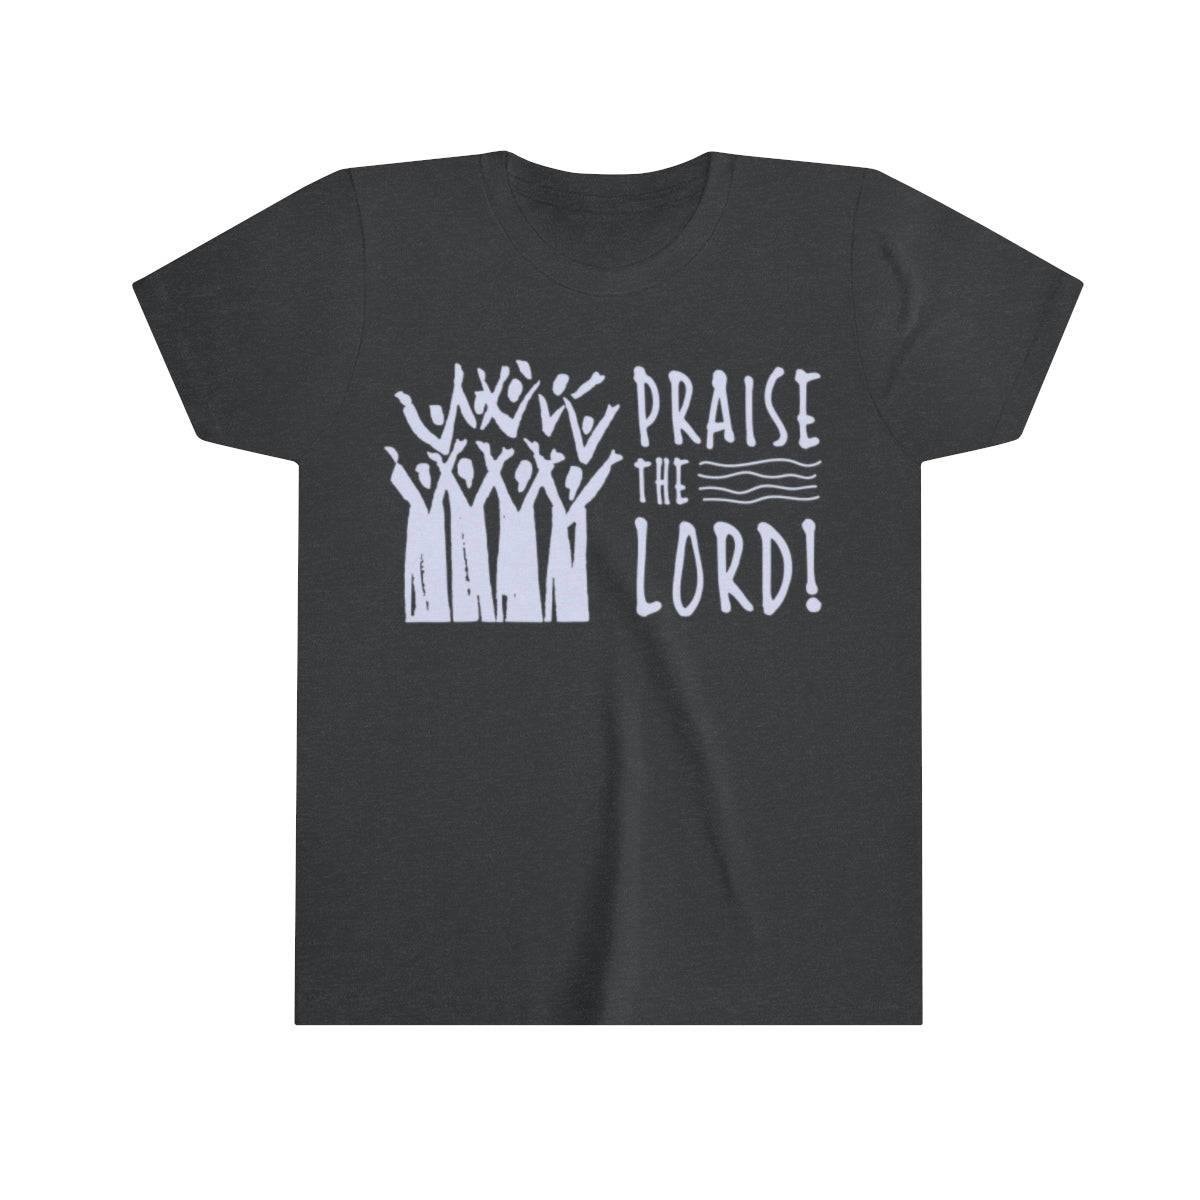 Praise the Lord Youth Short Sleeve Tee-Kids clothes-PureDesignTees